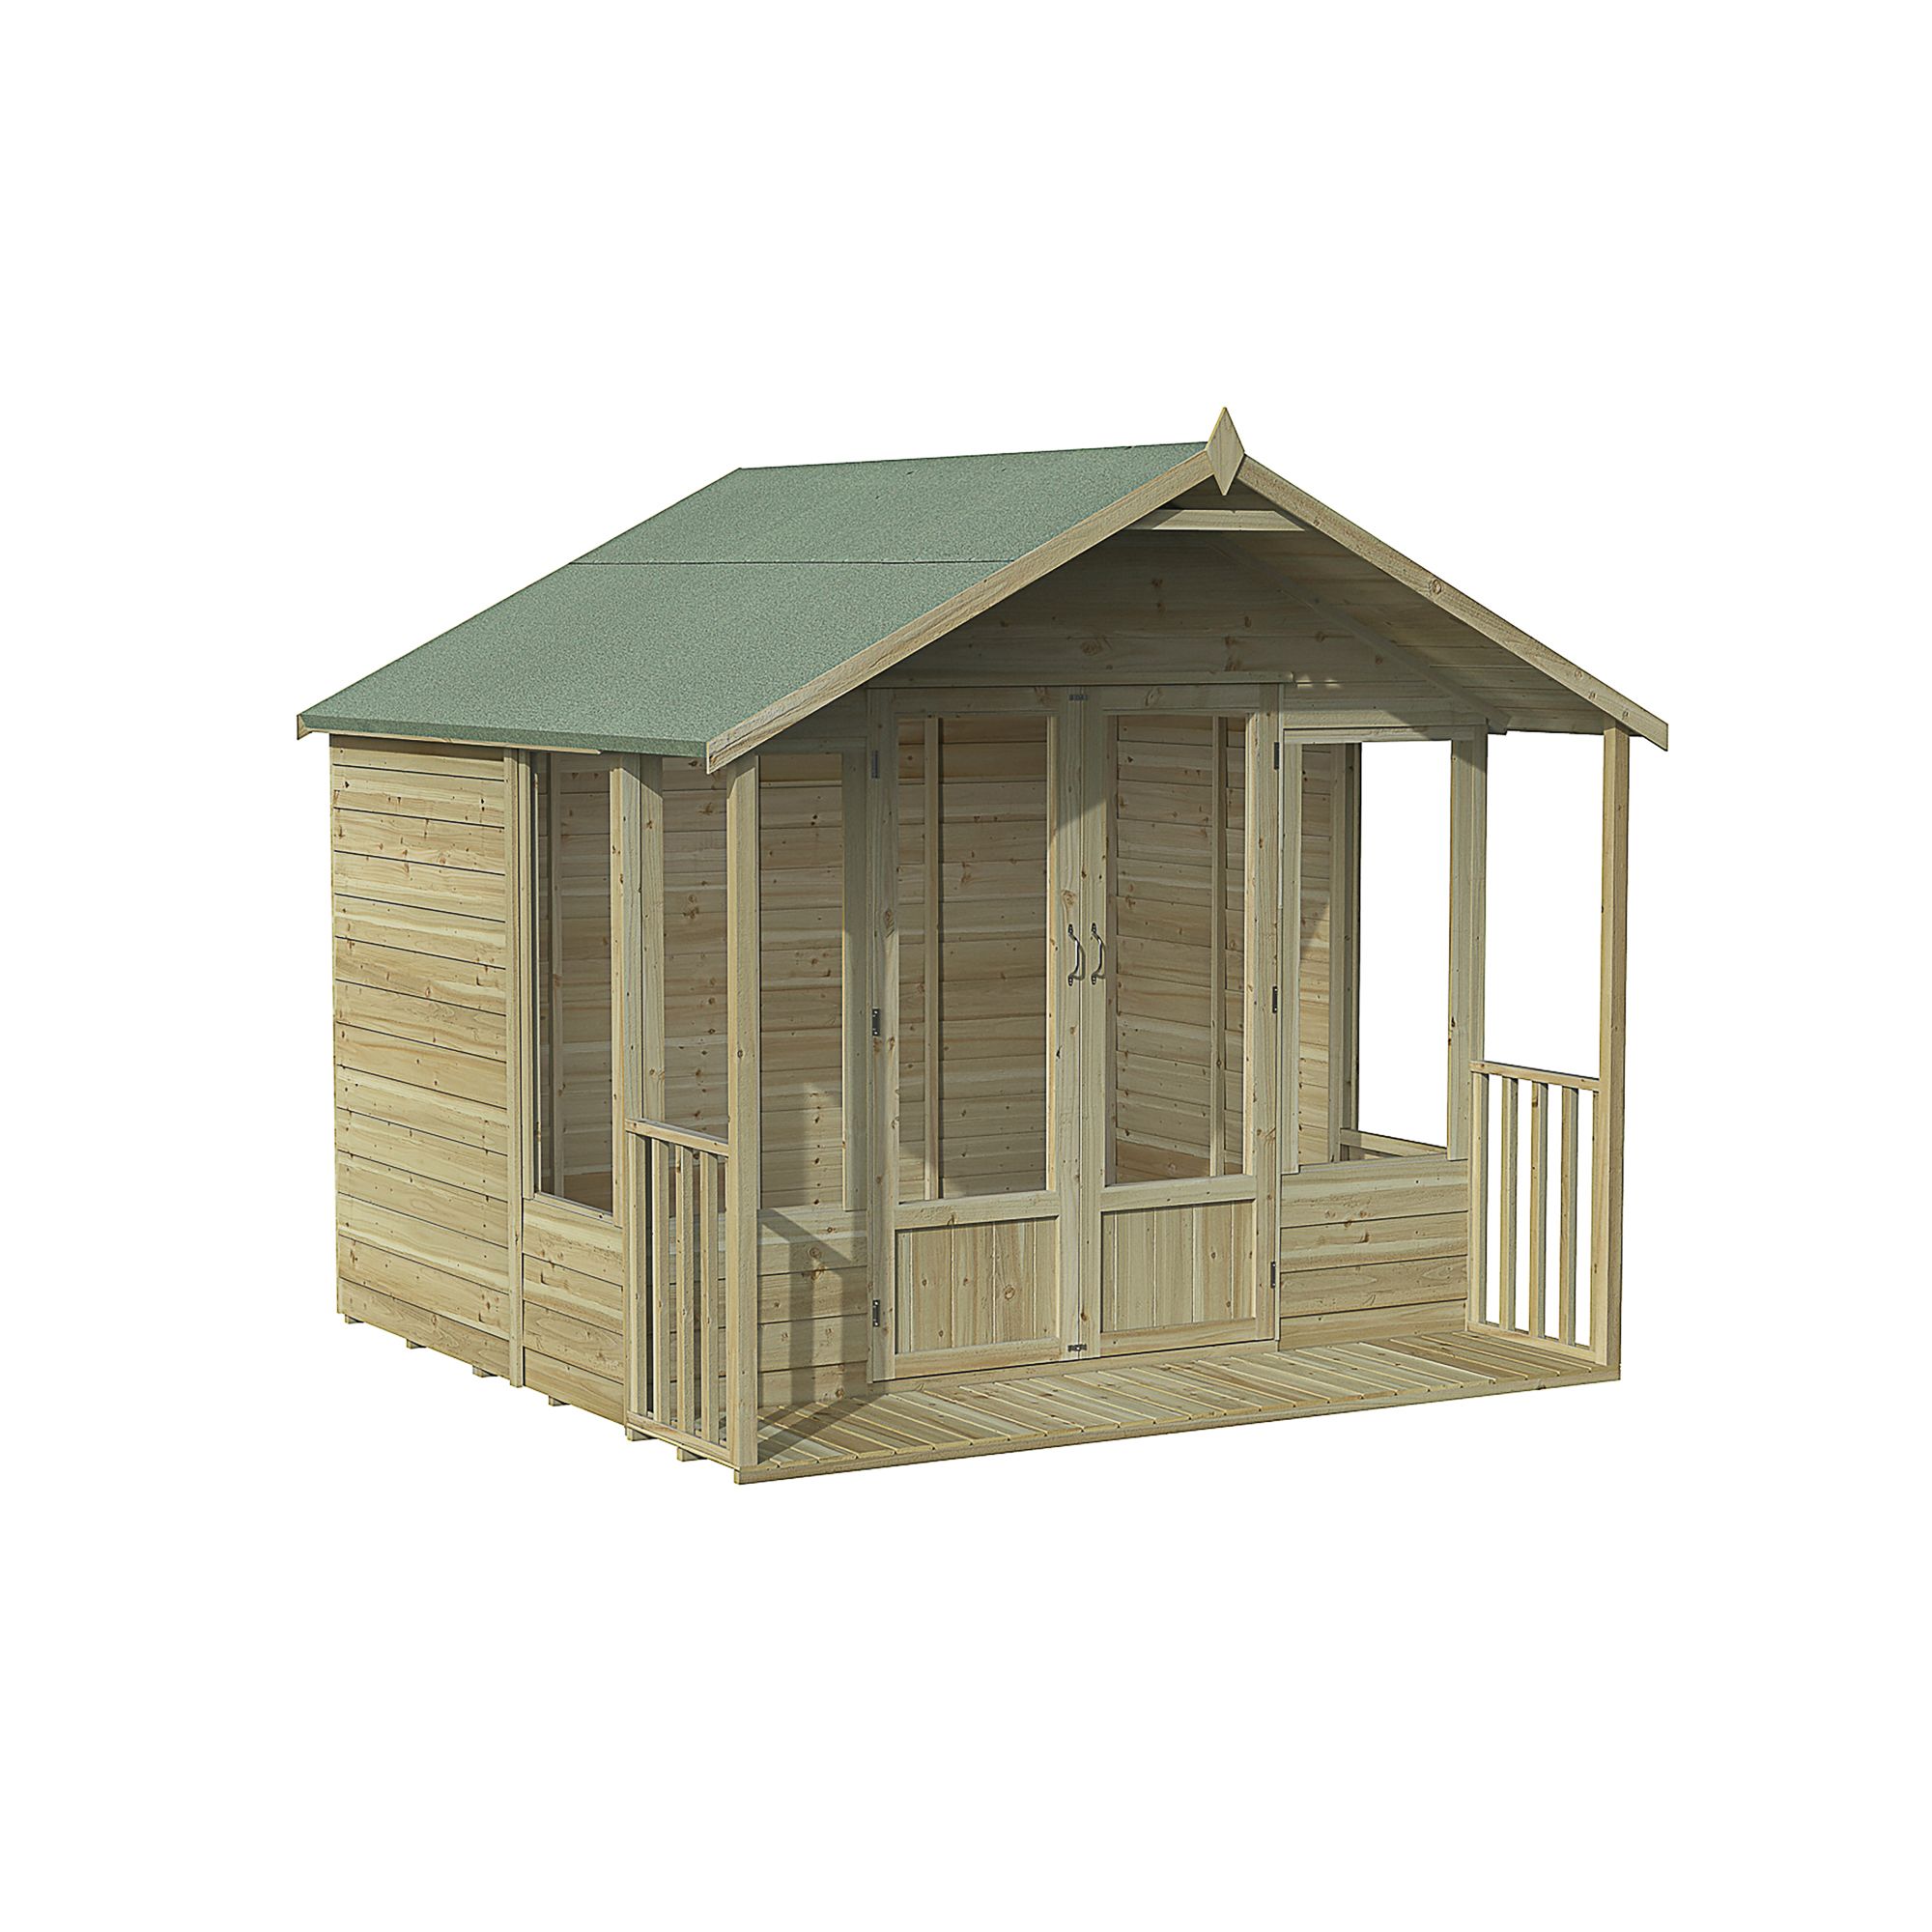 Forest Garden Oakley 8x8 ft with Double door & 4 windows Apex Wooden Summer house - Assembly service included